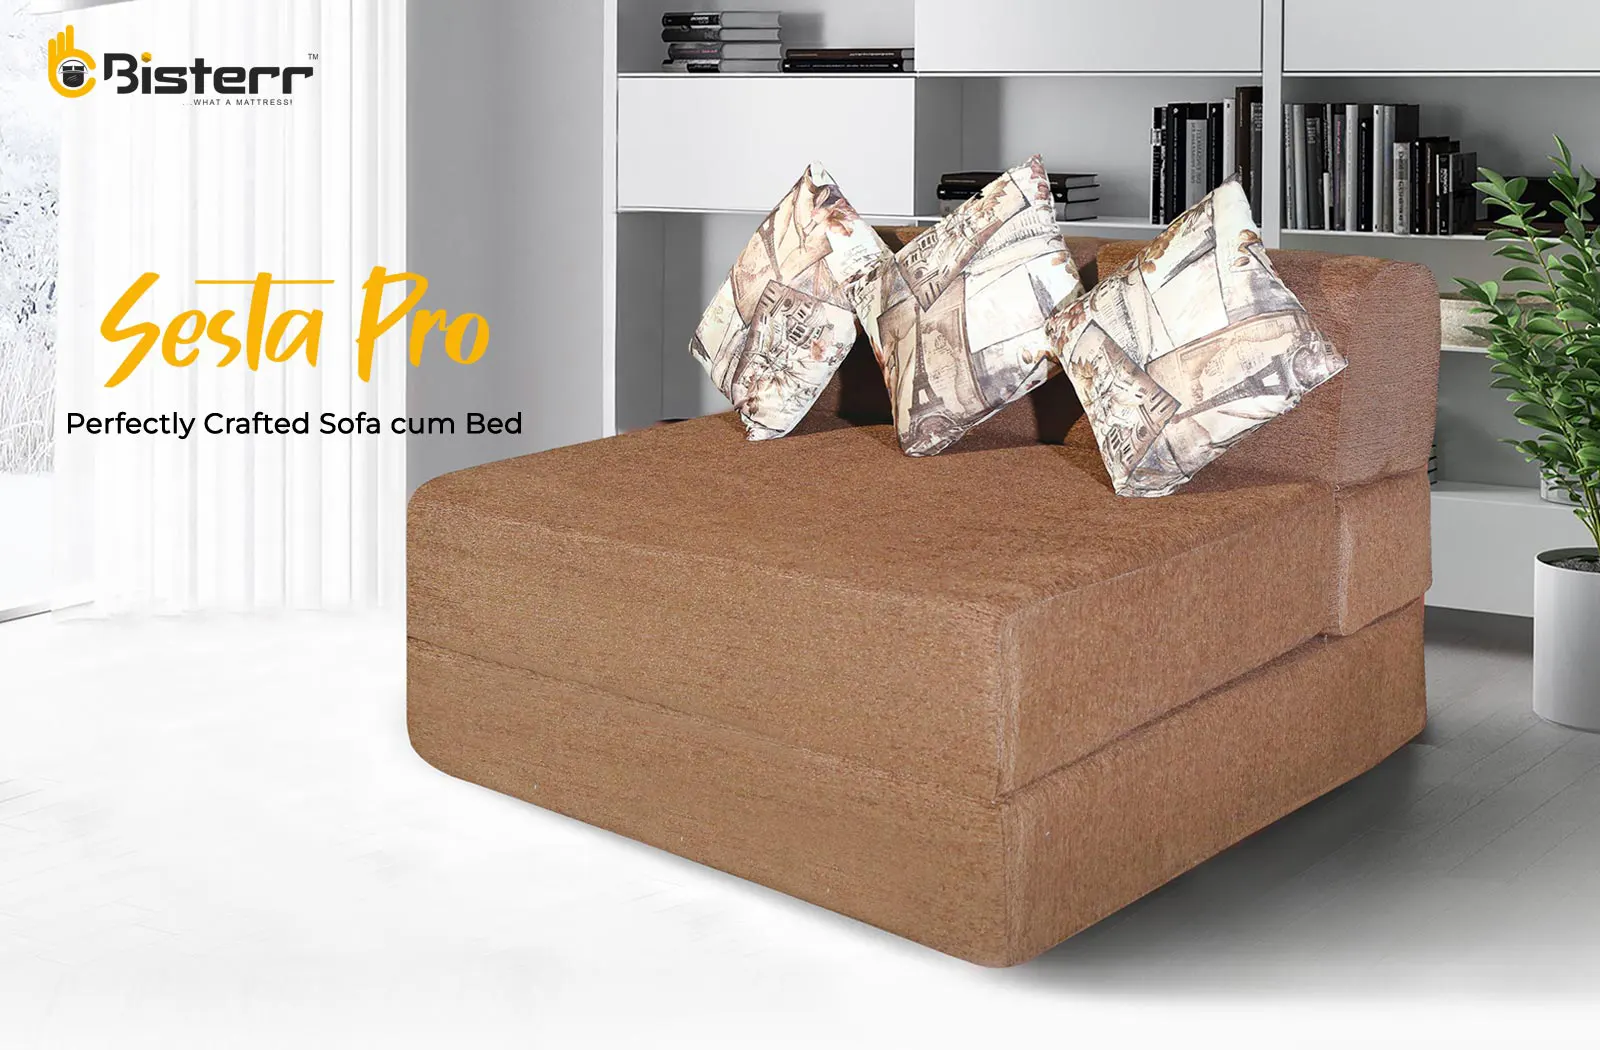 Sesta Pro-Perfectly Crafted Sofa Cum Bed